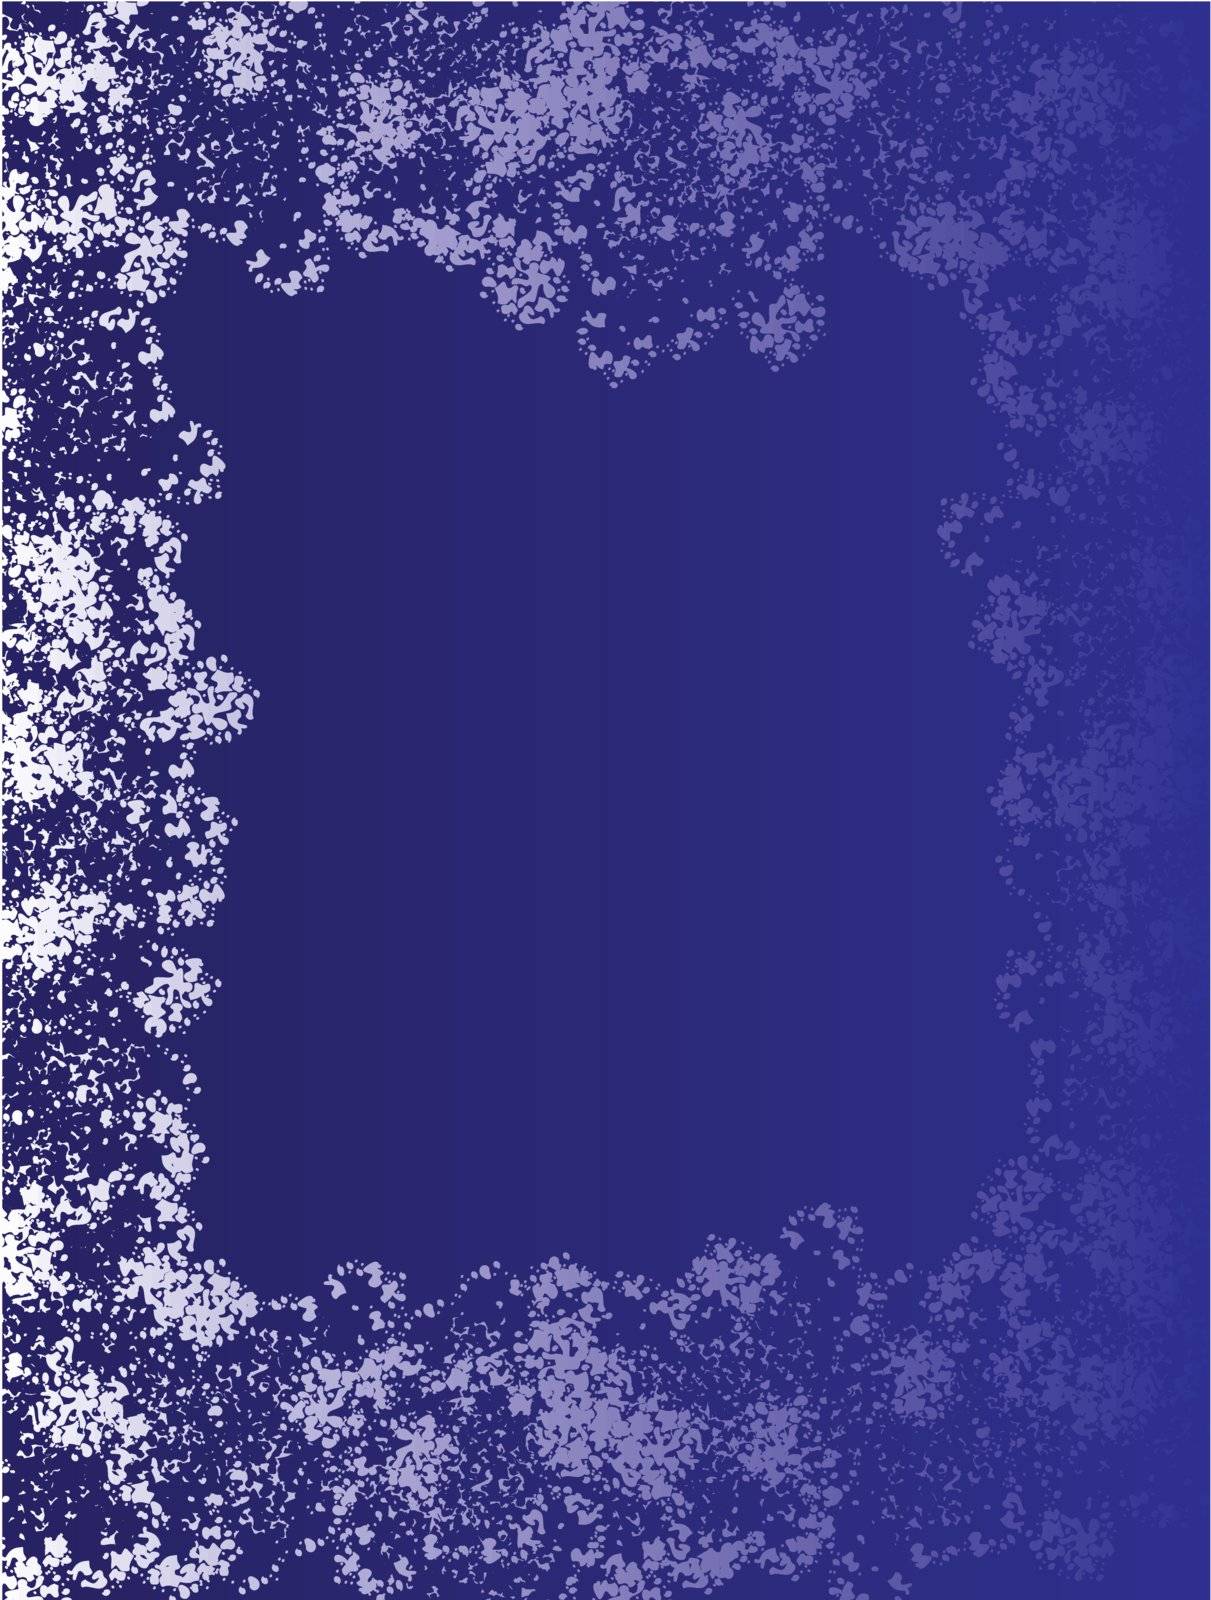 The abstract white framework symbolising snow, on a dark blue background